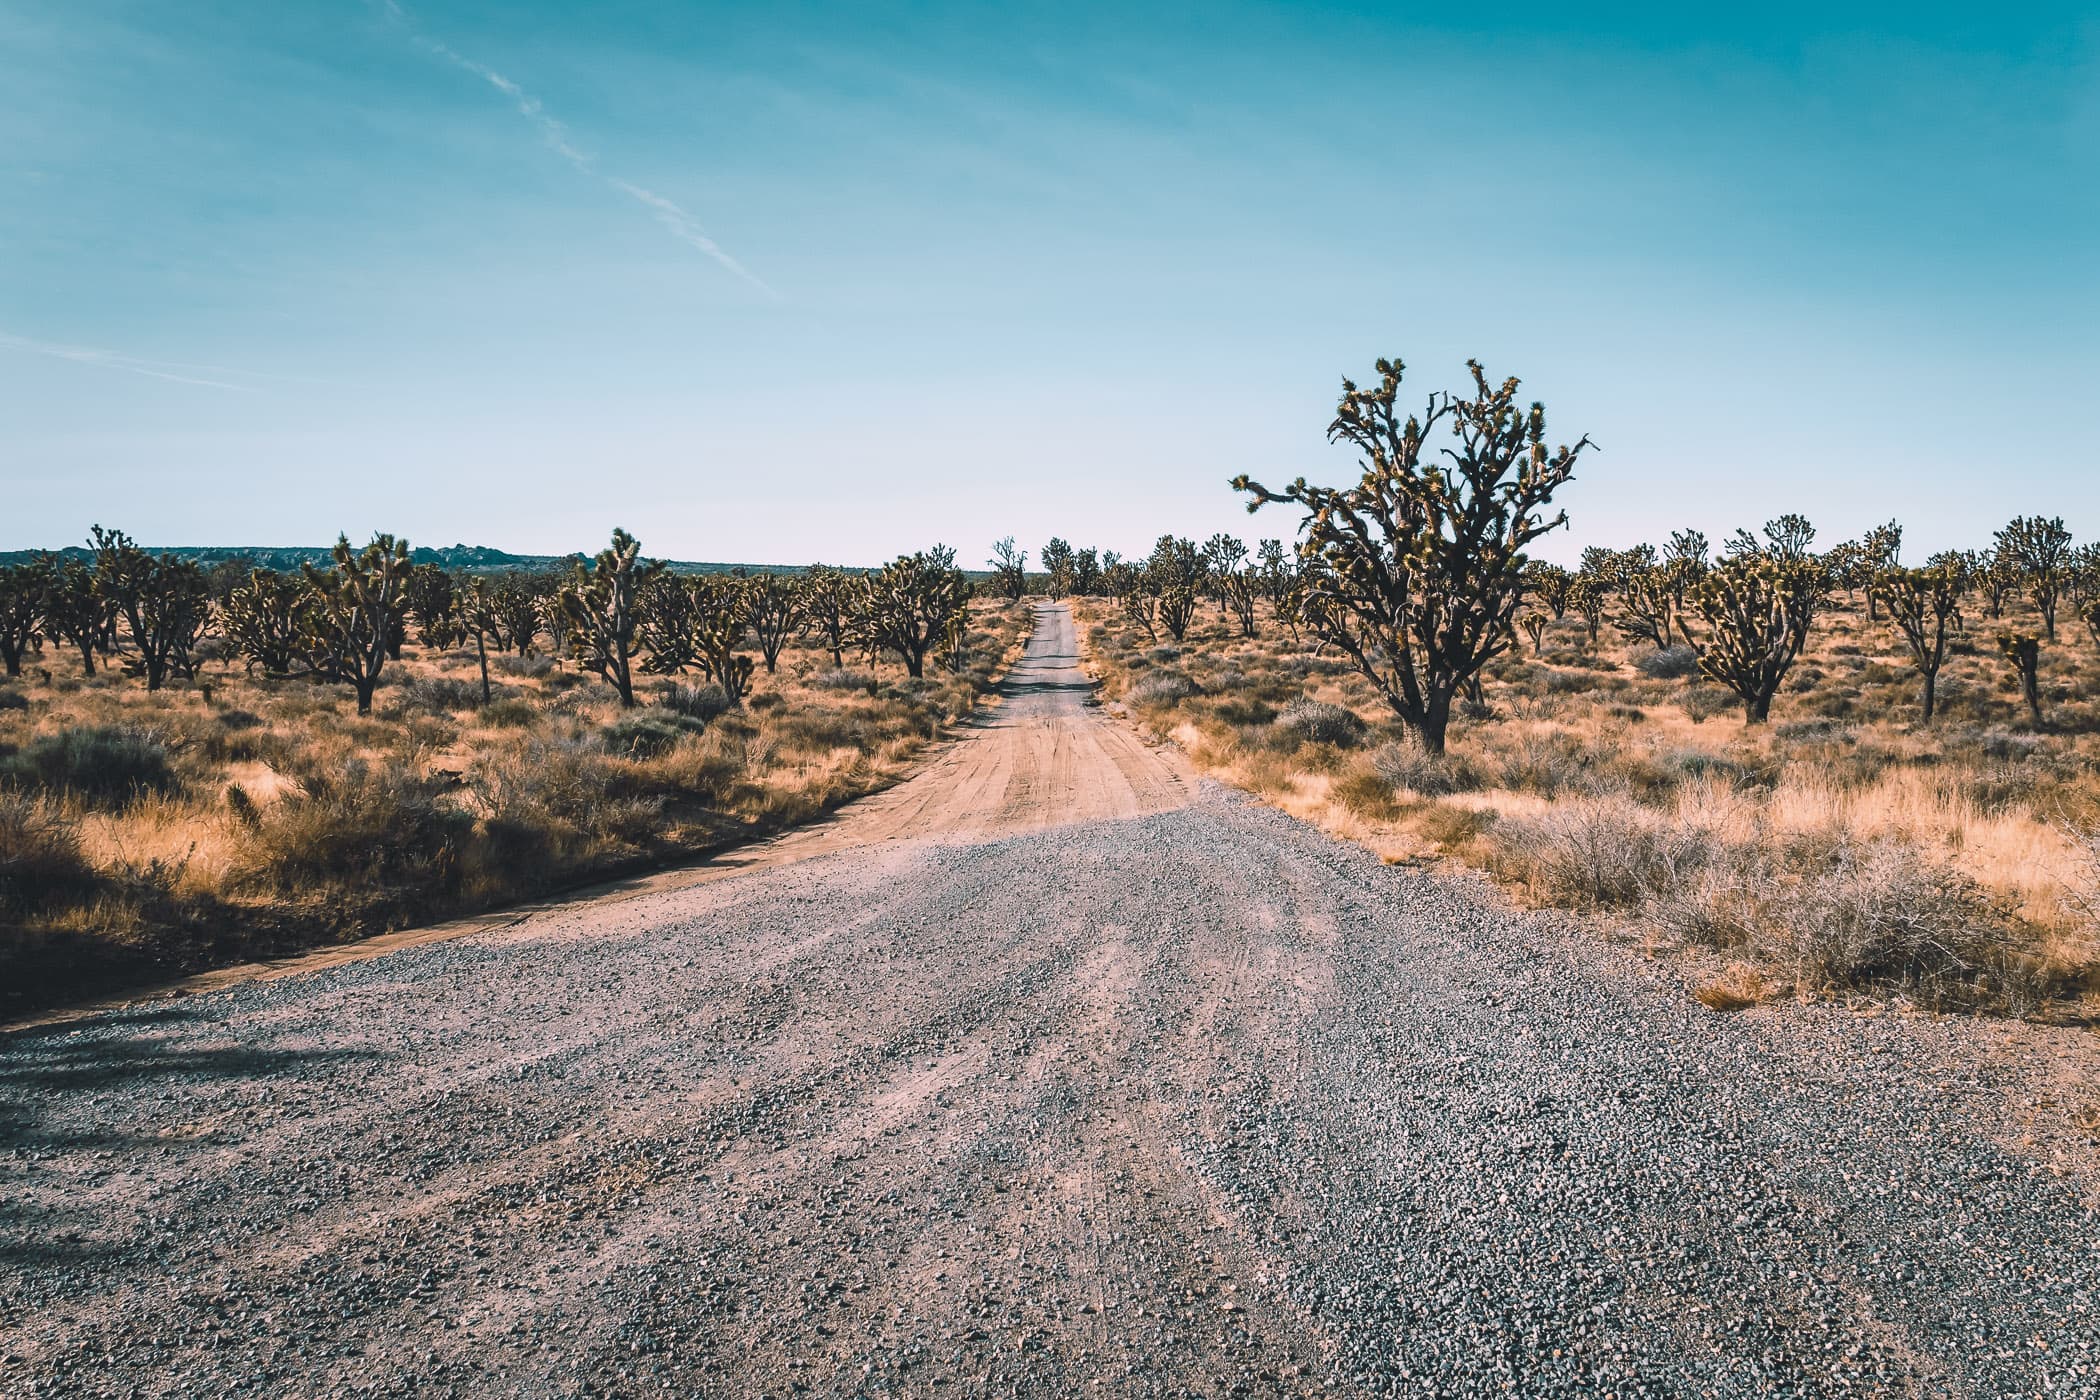 A gravel road leads into the distance through an endless sea of Joshua trees at the Mojave National Preserve, California.